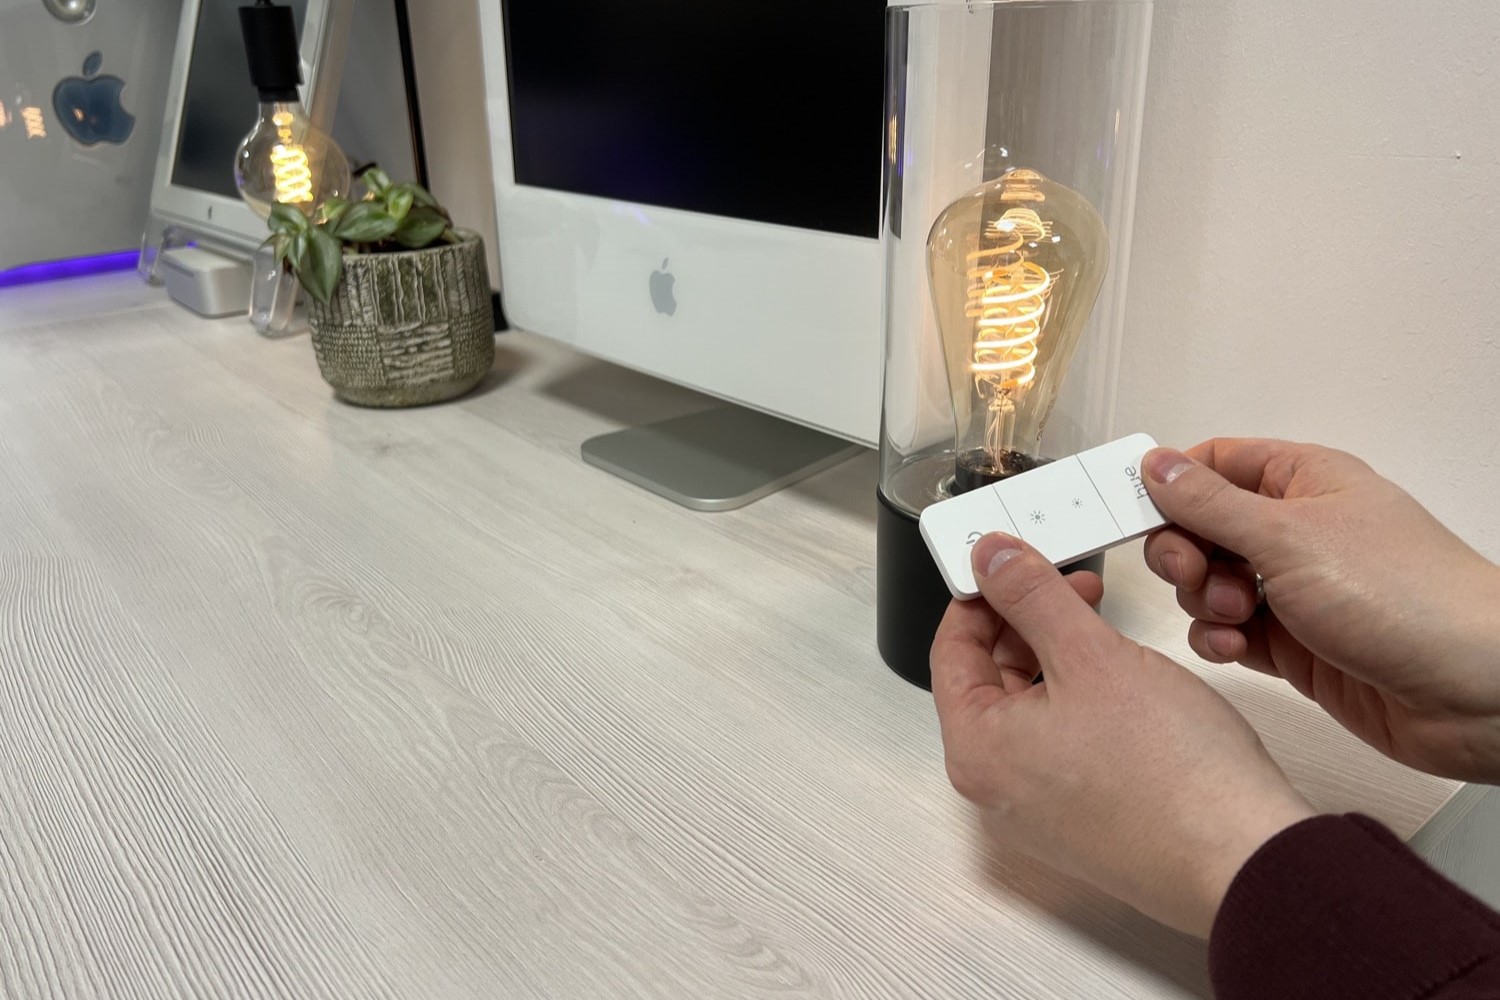 How To Reset Philips Hue Dimmer Switch